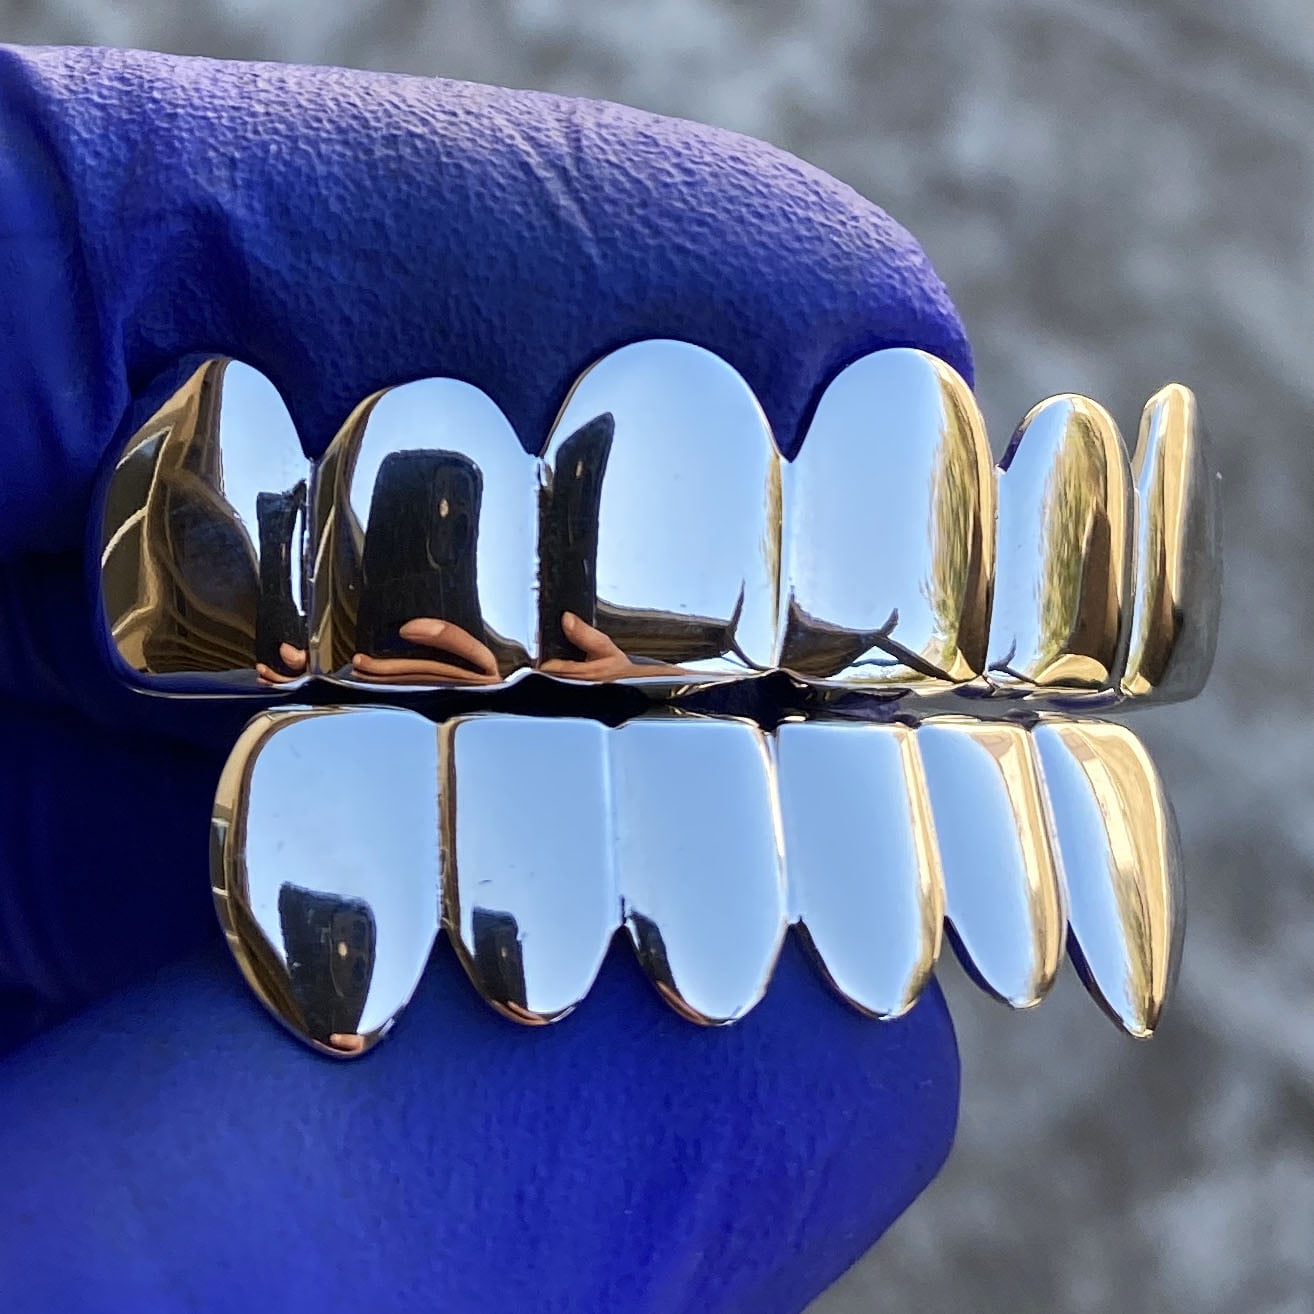 Men's Real Solid 925 Sterling Silver Grillz Set Six Top 6 Bottom Teeth Pre-Made Plain Hip Hop Grills